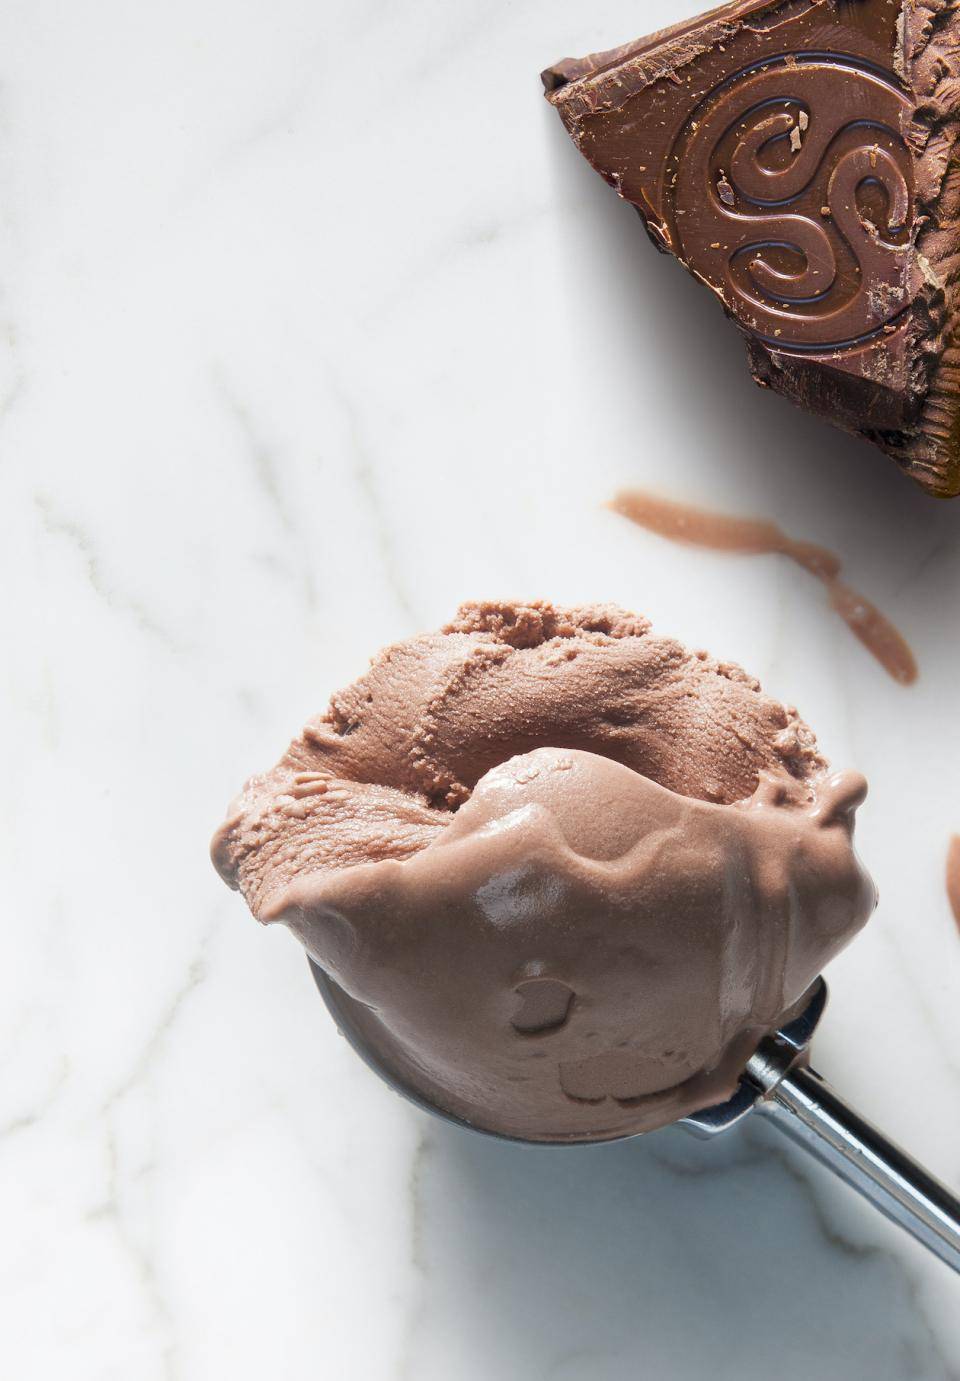 A scoop of chocolate gelato with a brick of dark chocolate in the background